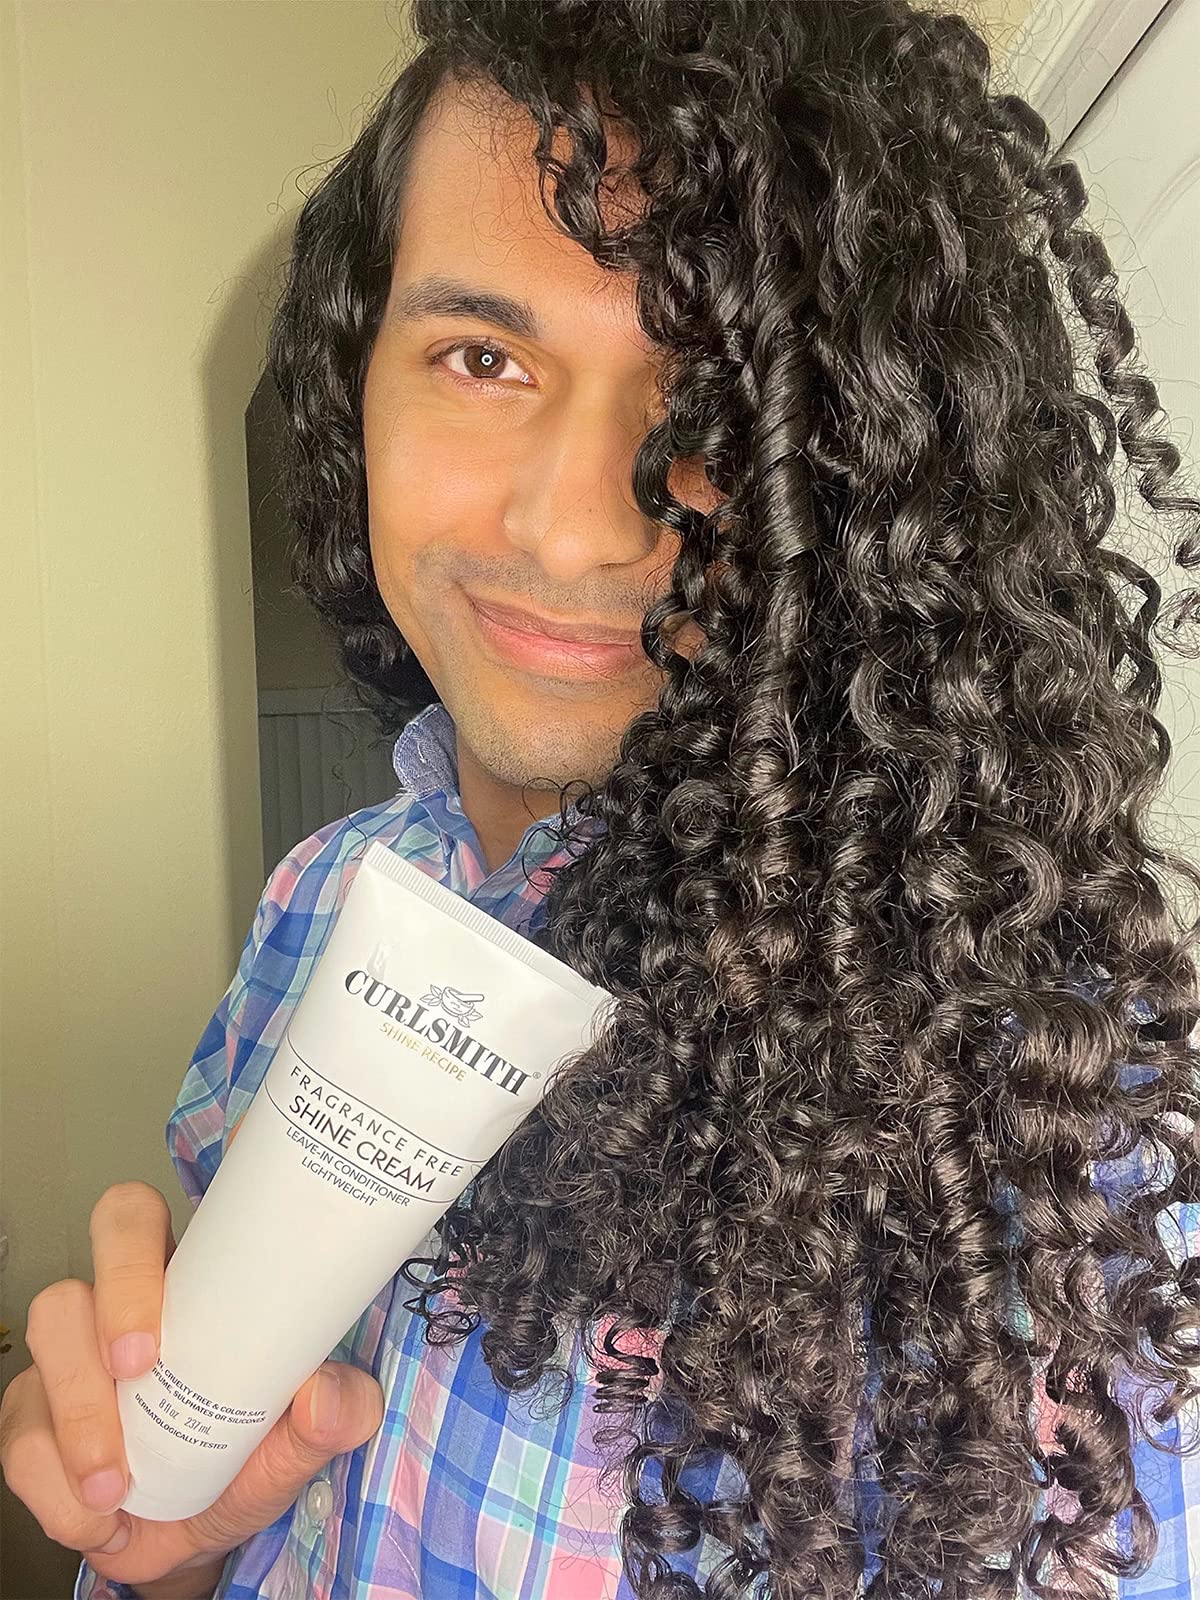 CURLSMITH - Shine Cream, Leave-In Conditioner, Moisturising, Sensitive, Fragrance Free for All Curl and Hair Types, Vegan (8 fl oz)